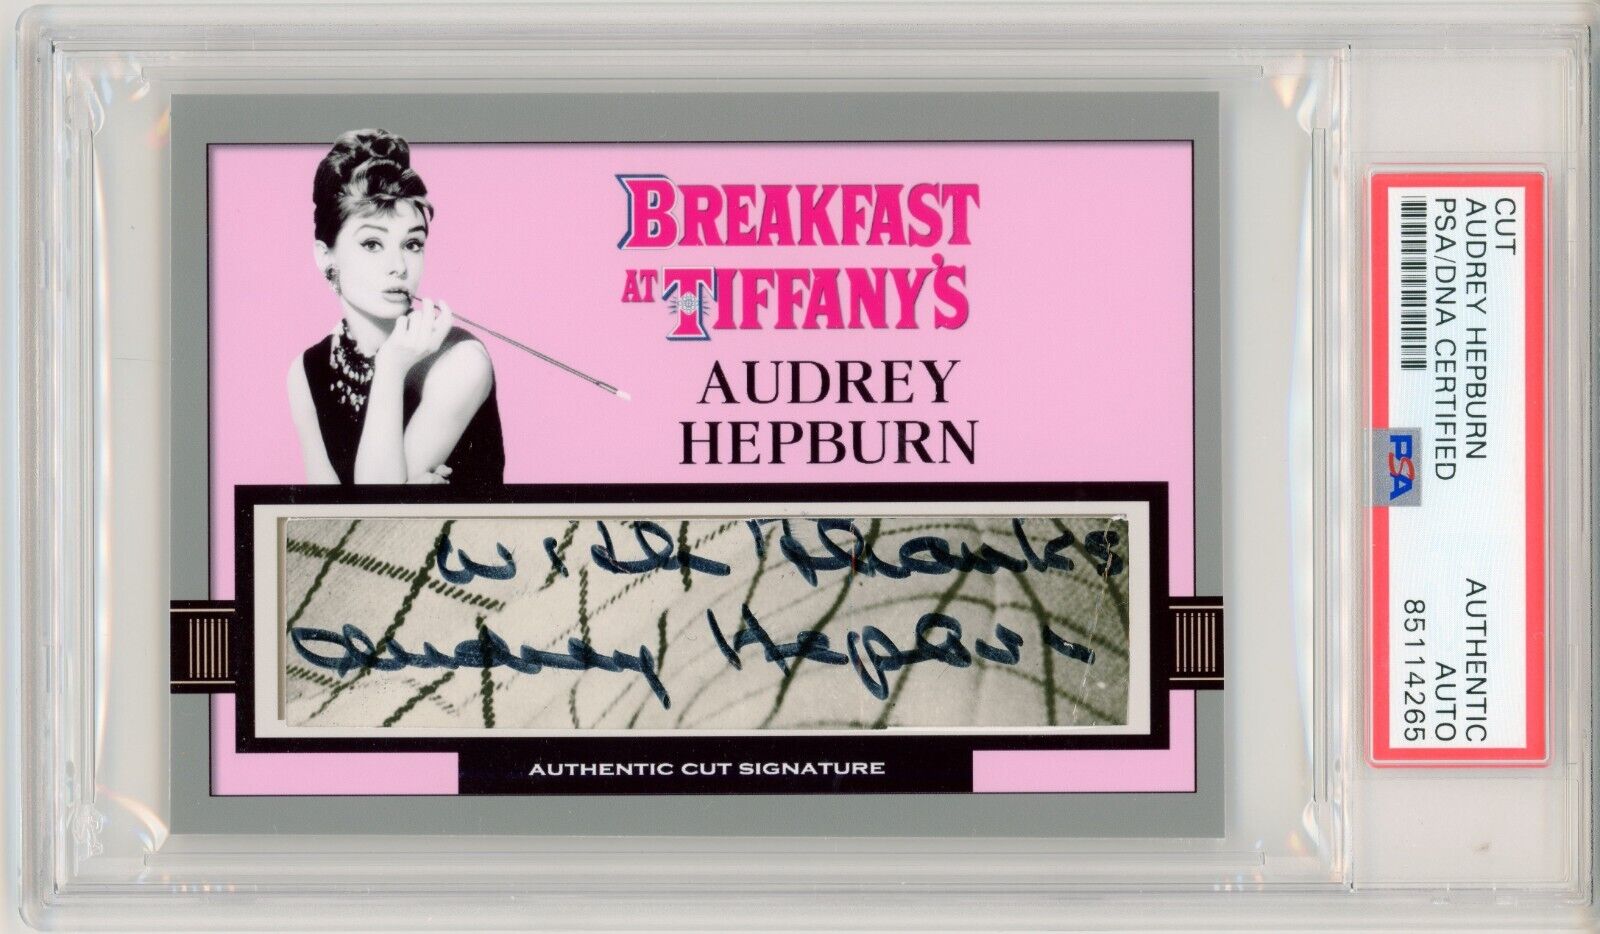 Audrey Hepburn ~ Signed Autographed Breakfast at Tiffany's Trading Card~ PSA DNA